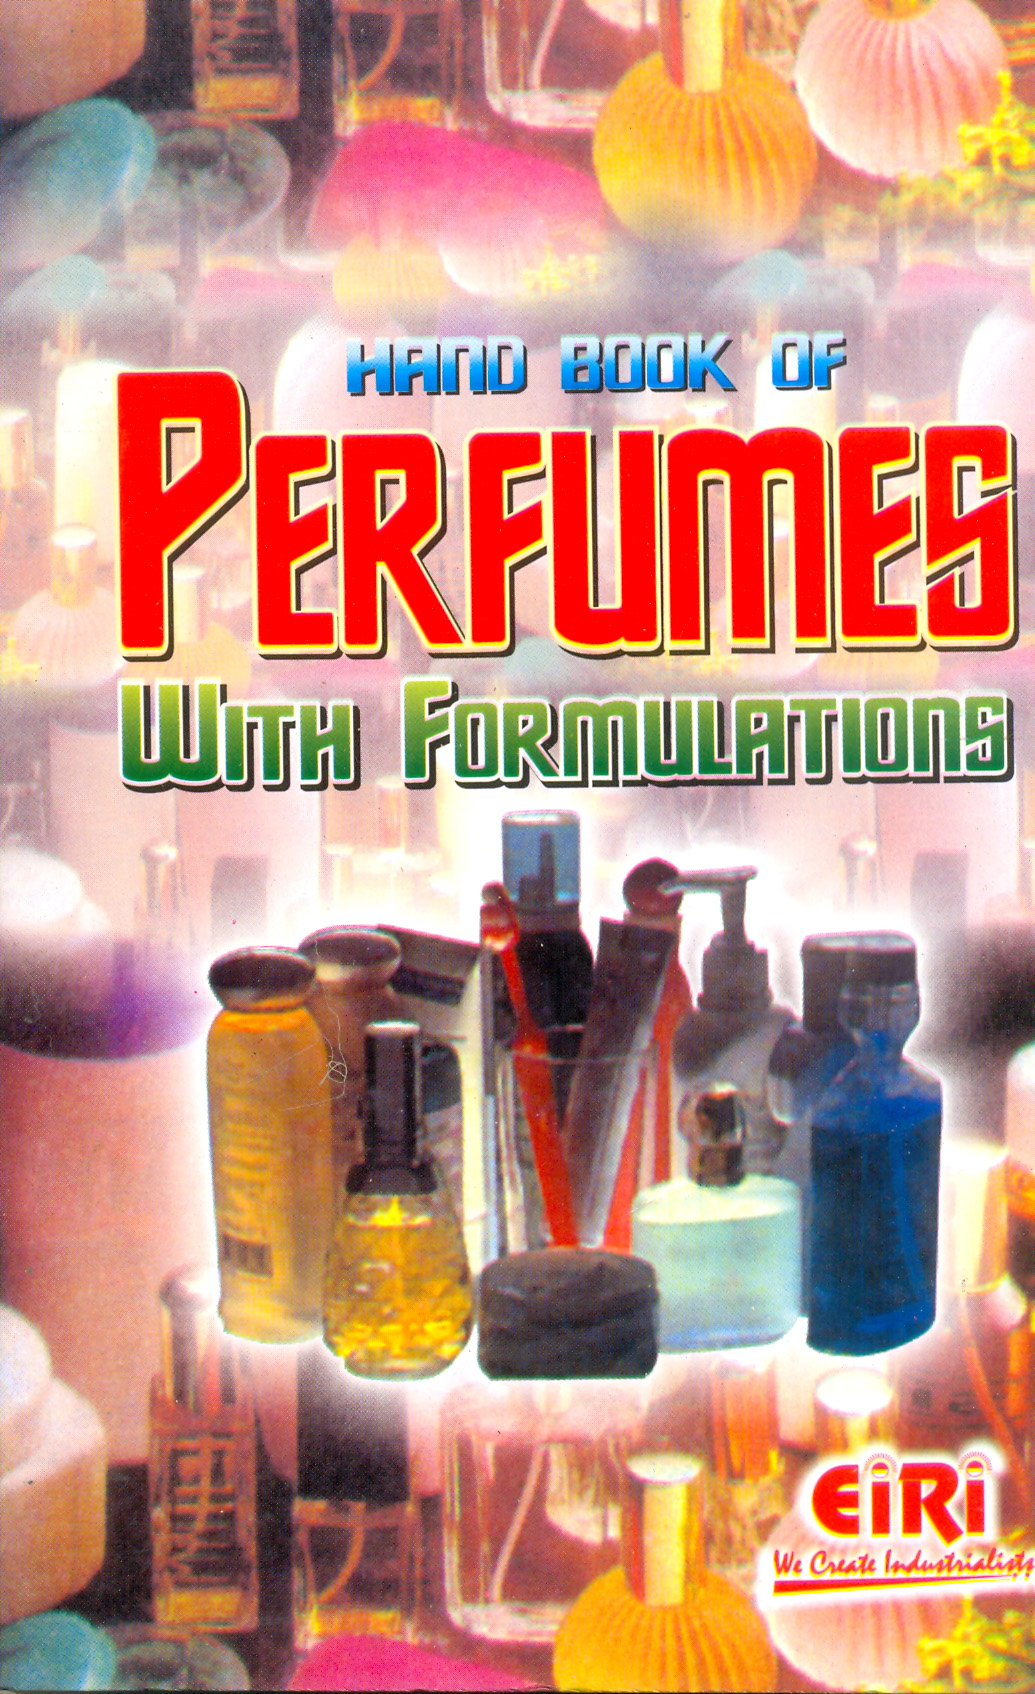 hand book of perfumes with formulations